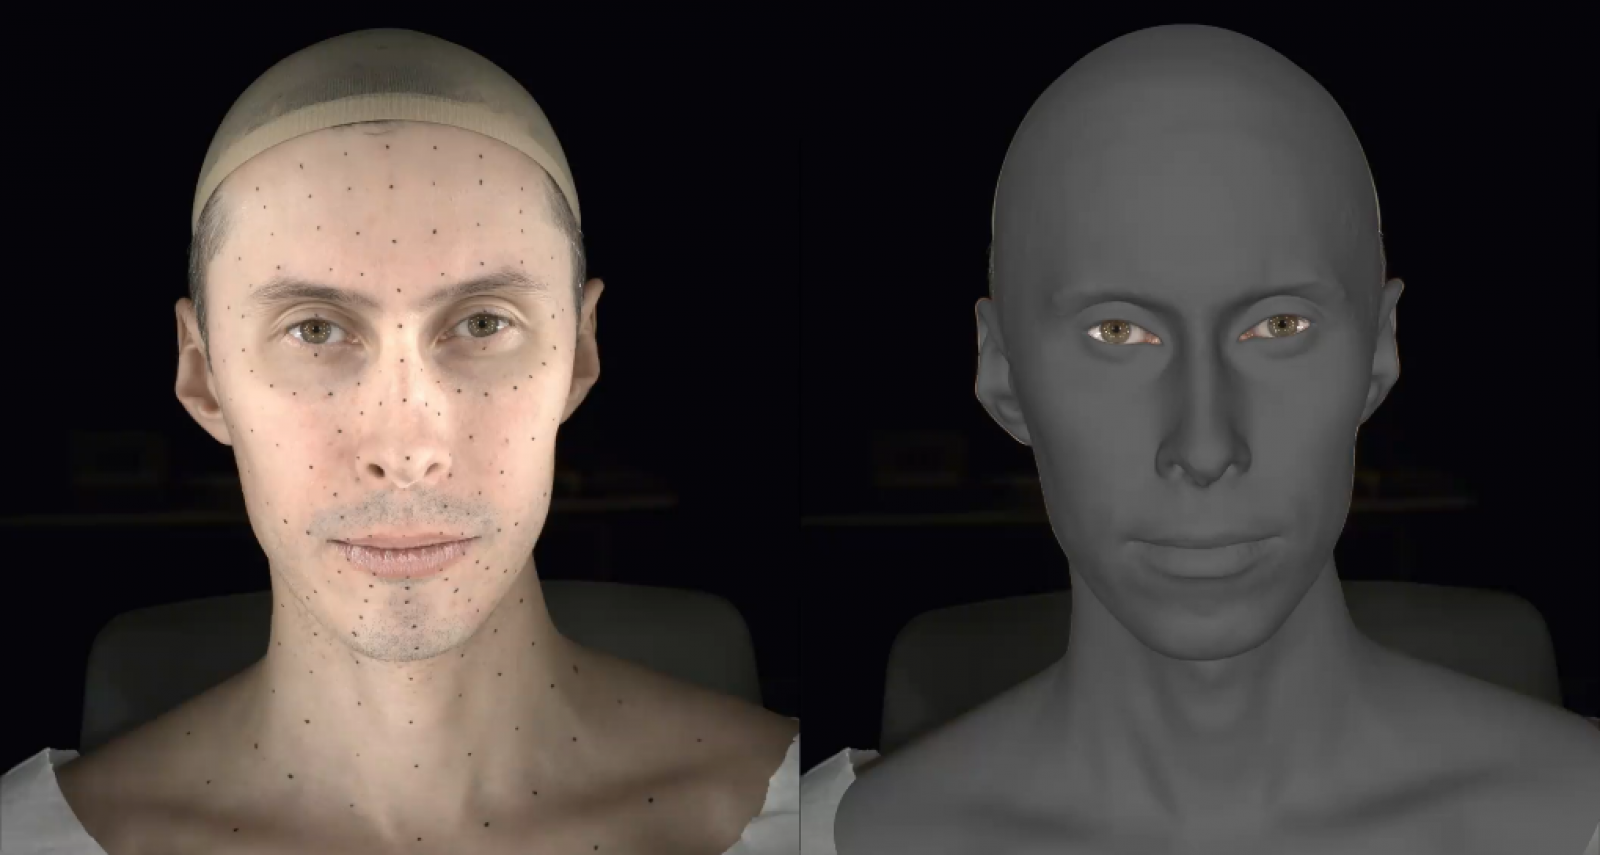 4D Capture Test for Extreme Facial Expressions